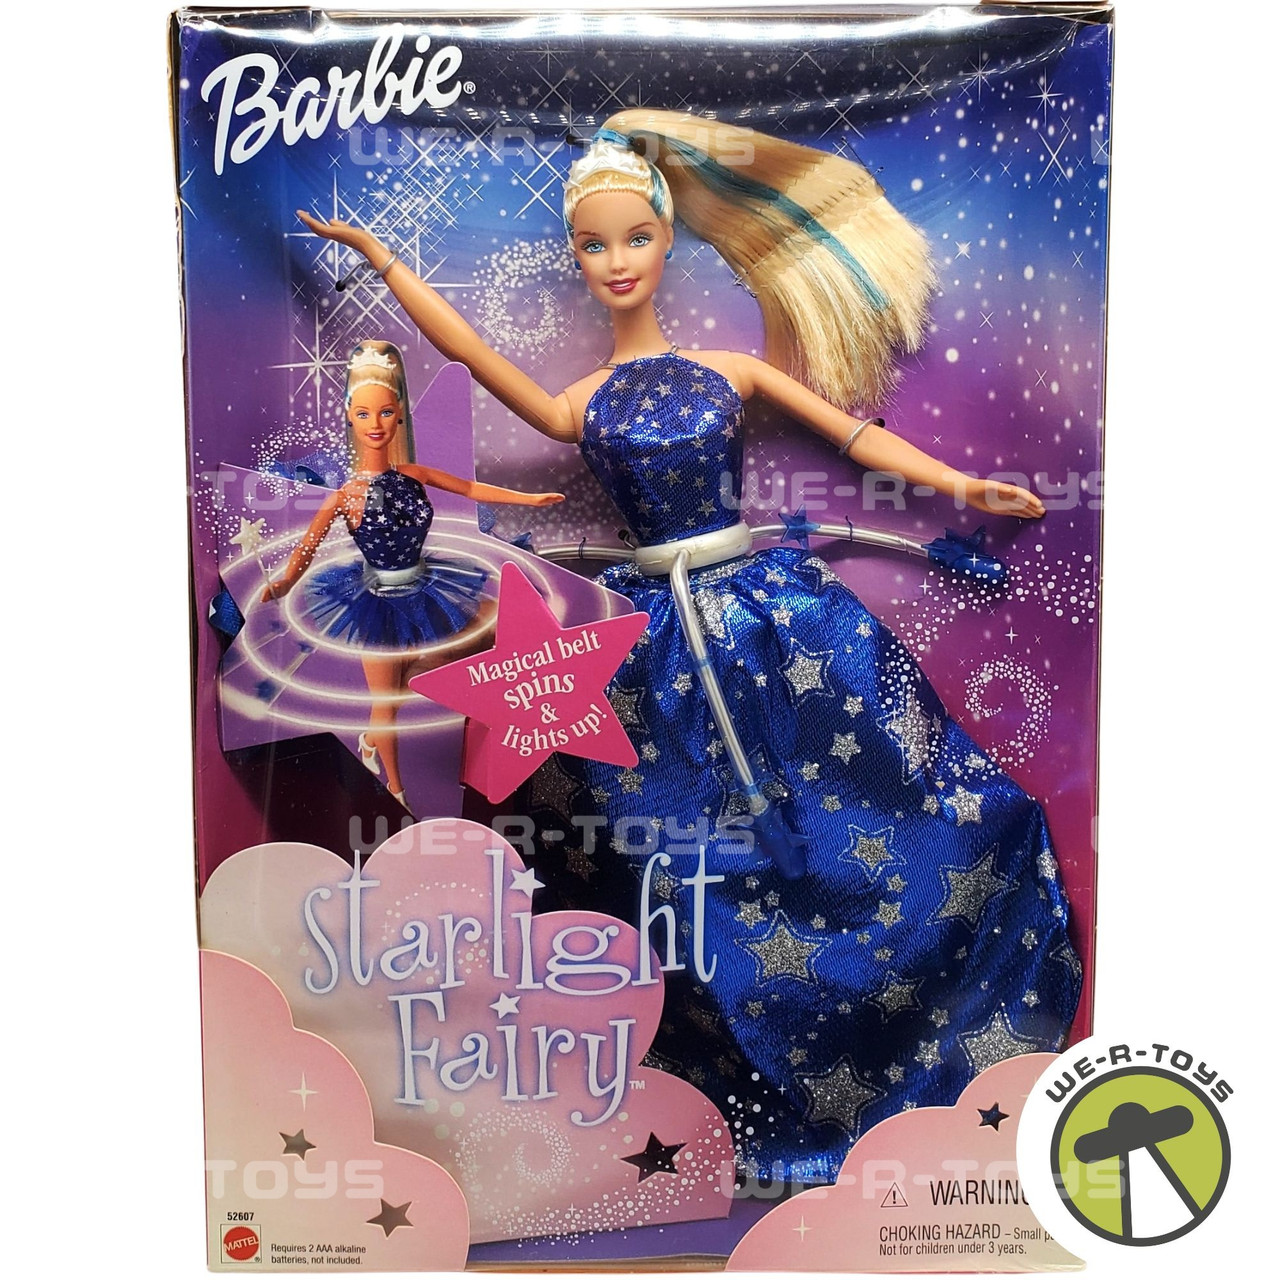 Starlight Fairy Barbie Doll with Magical Spinning Belt 2001 Mattel 52607